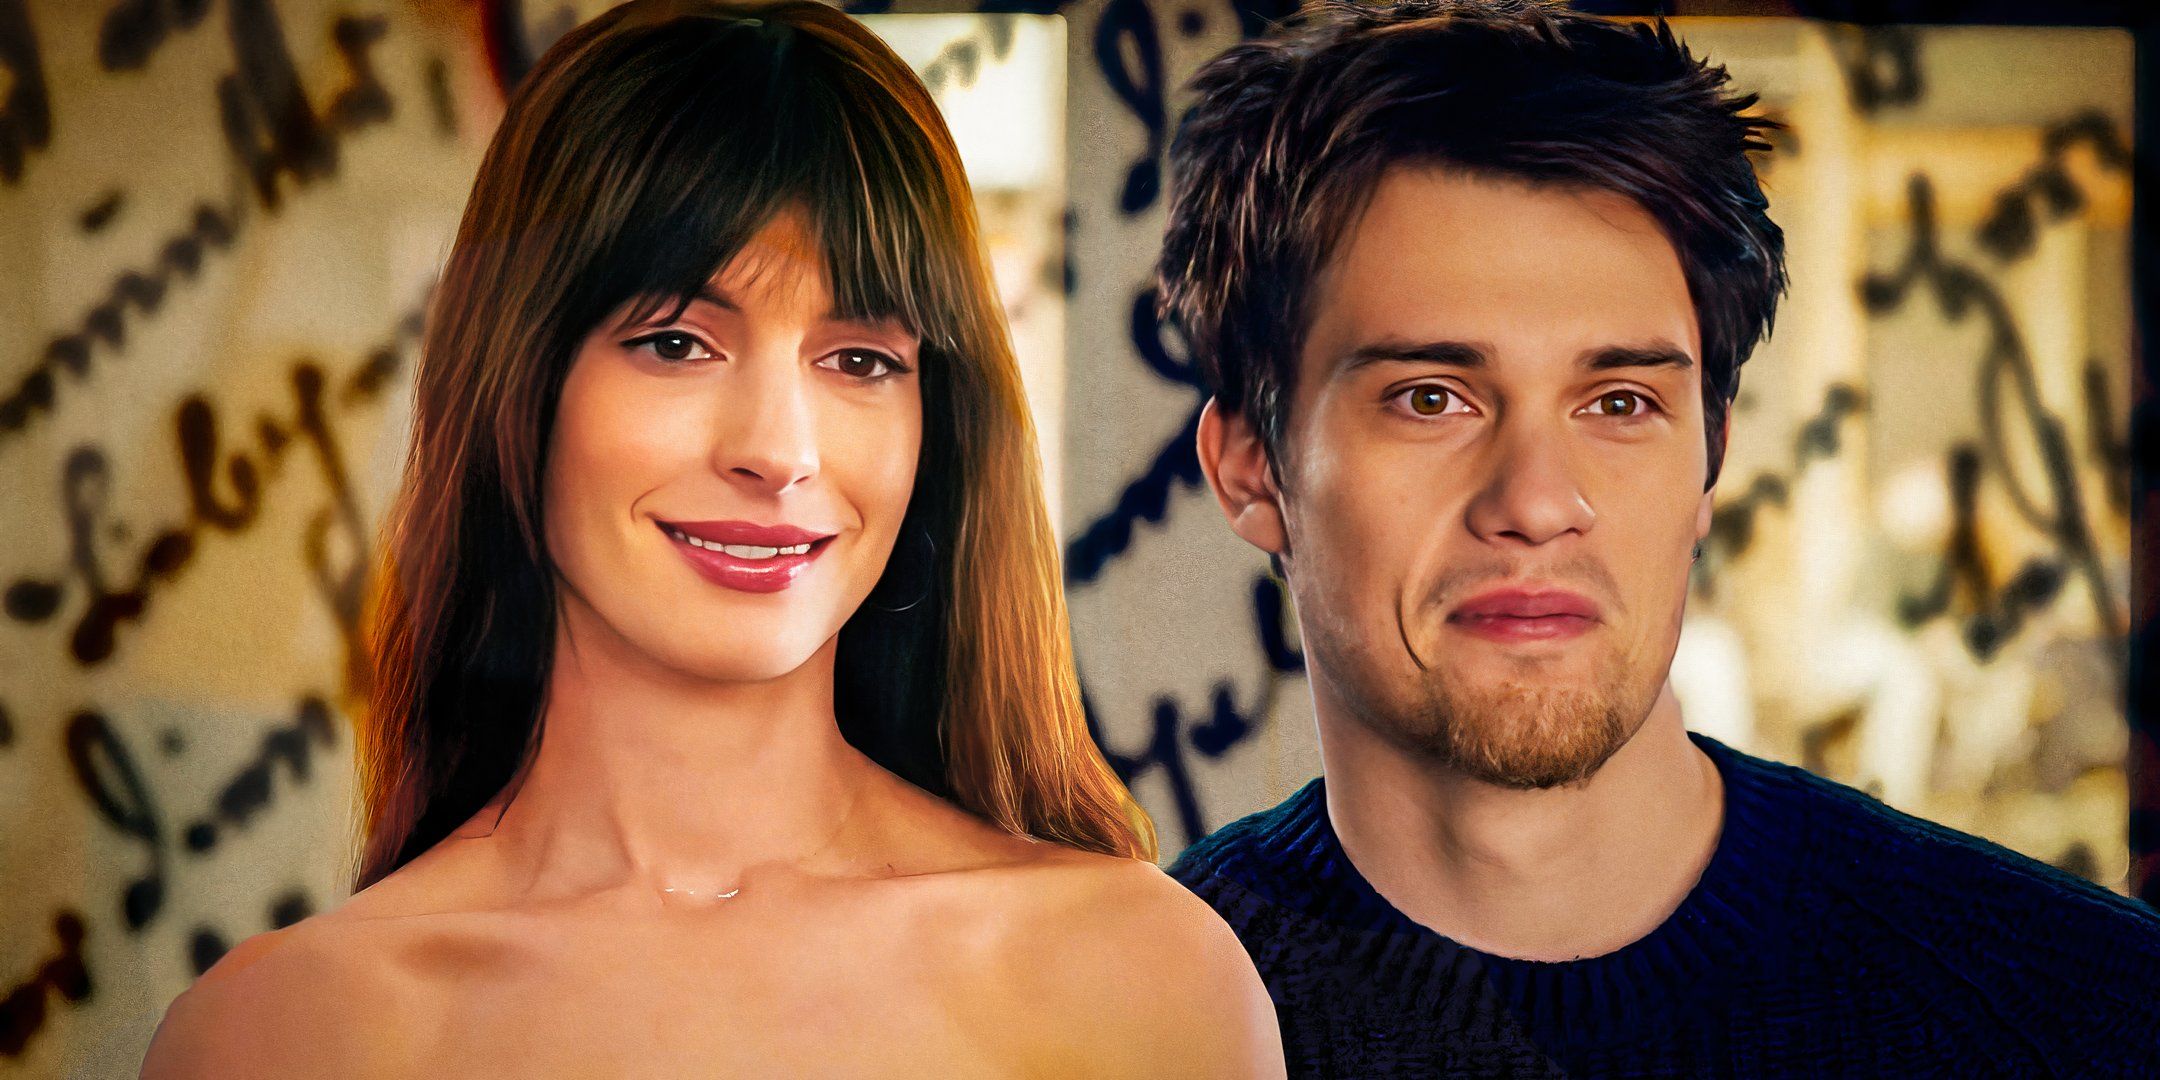 Anne Hathaway as Solen and Nicholas Galitzine as Hayes from The Idea of You